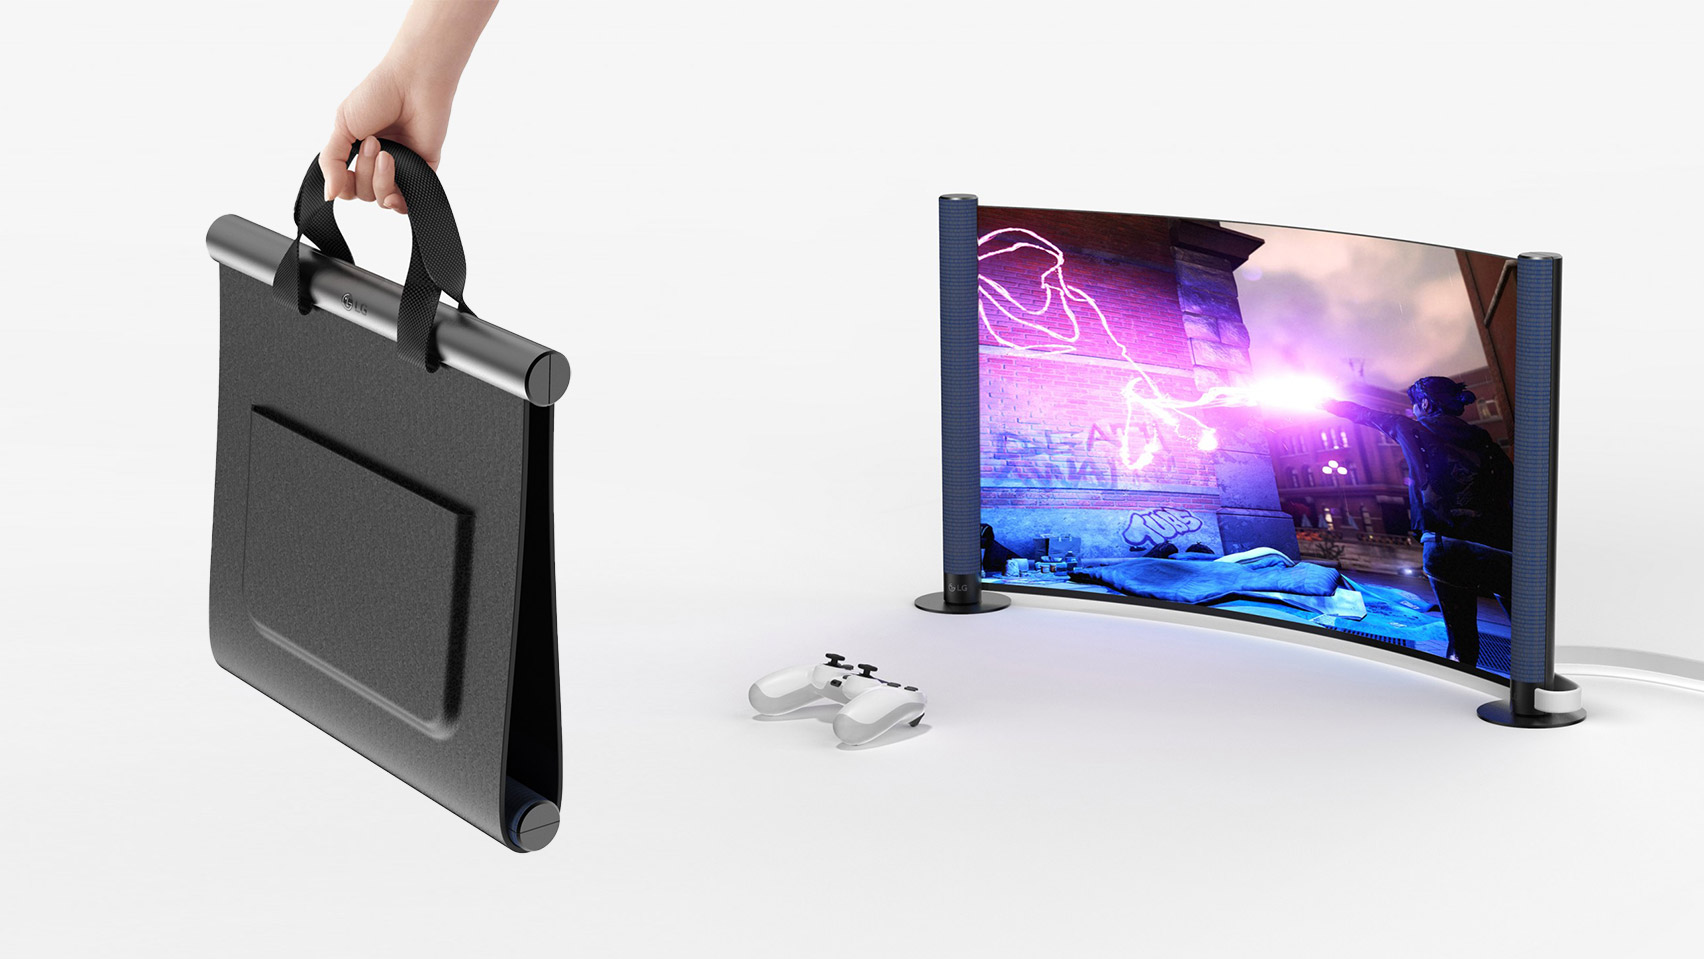 Folio by Kevin Chiam carry case with flexible screen for Dezeen and LG Display's OLED Go! competition